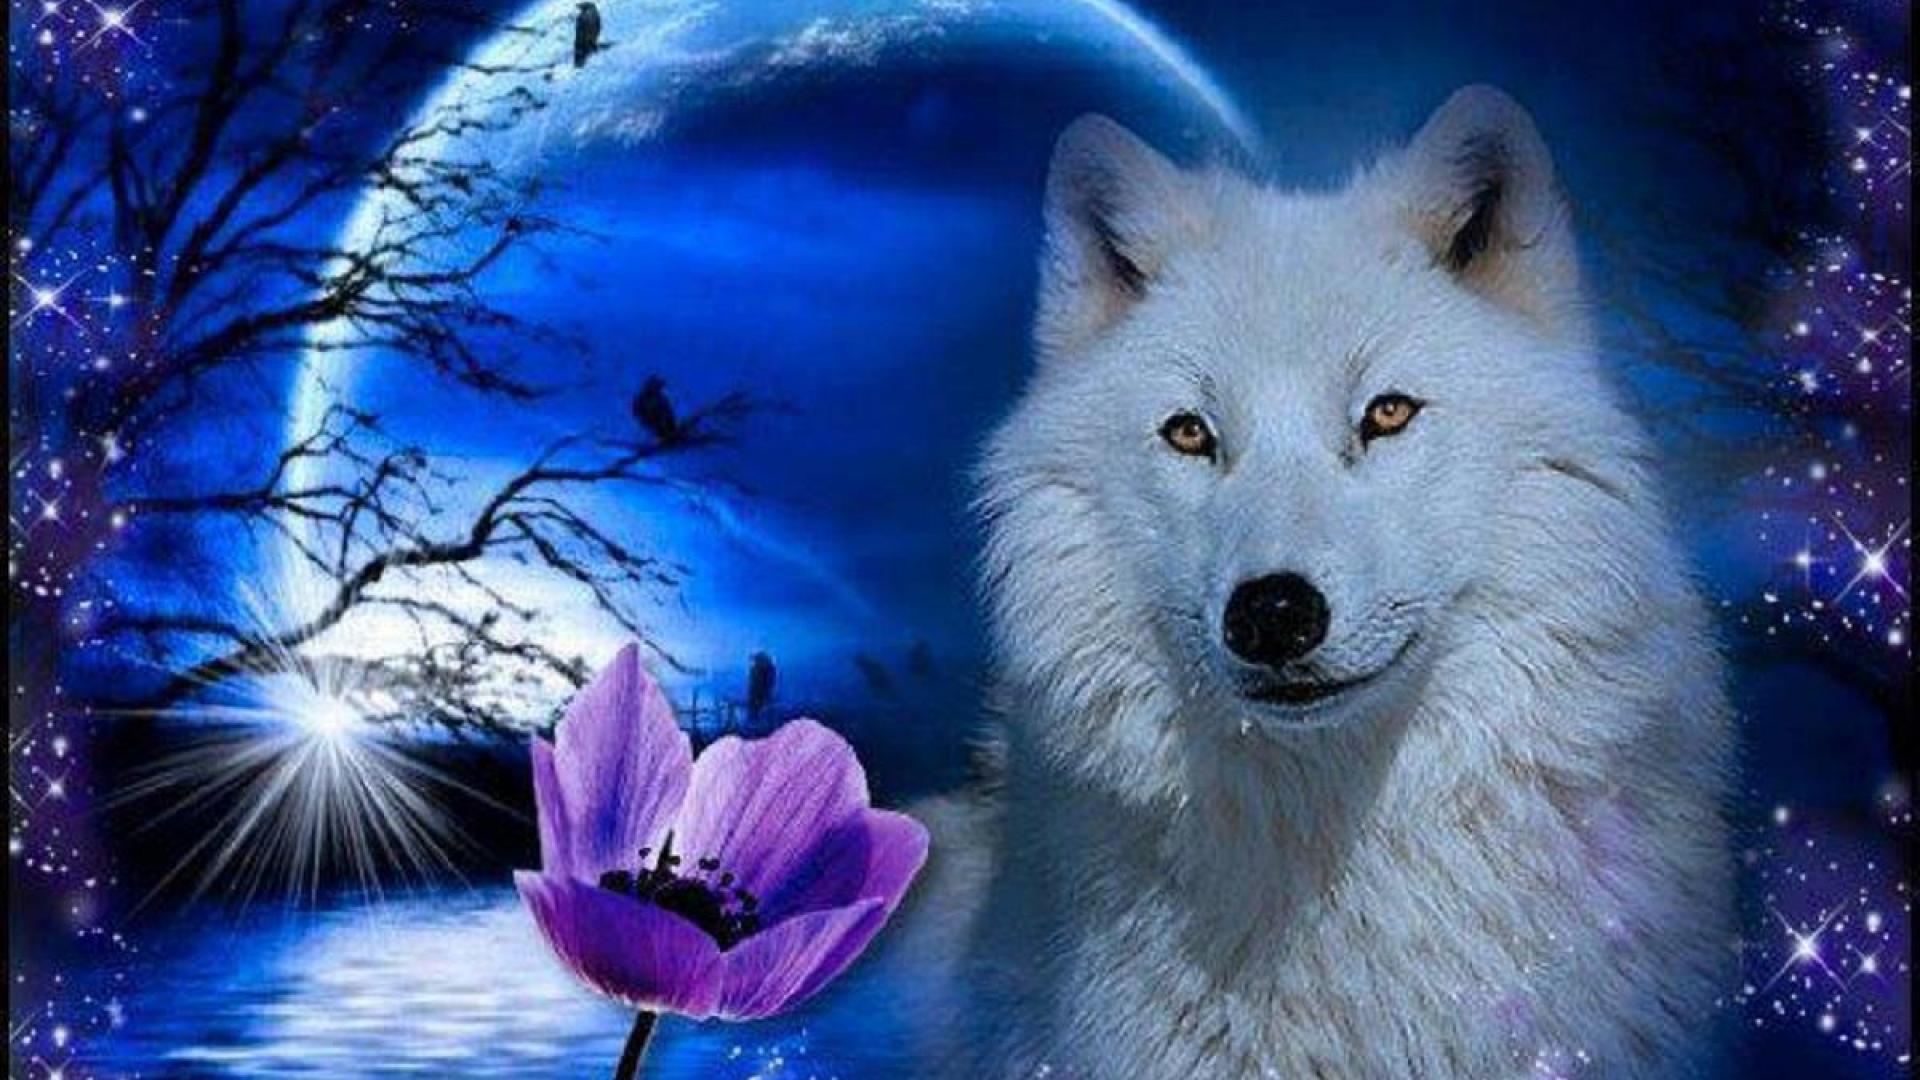 Wolf wallpaper free download Gallery